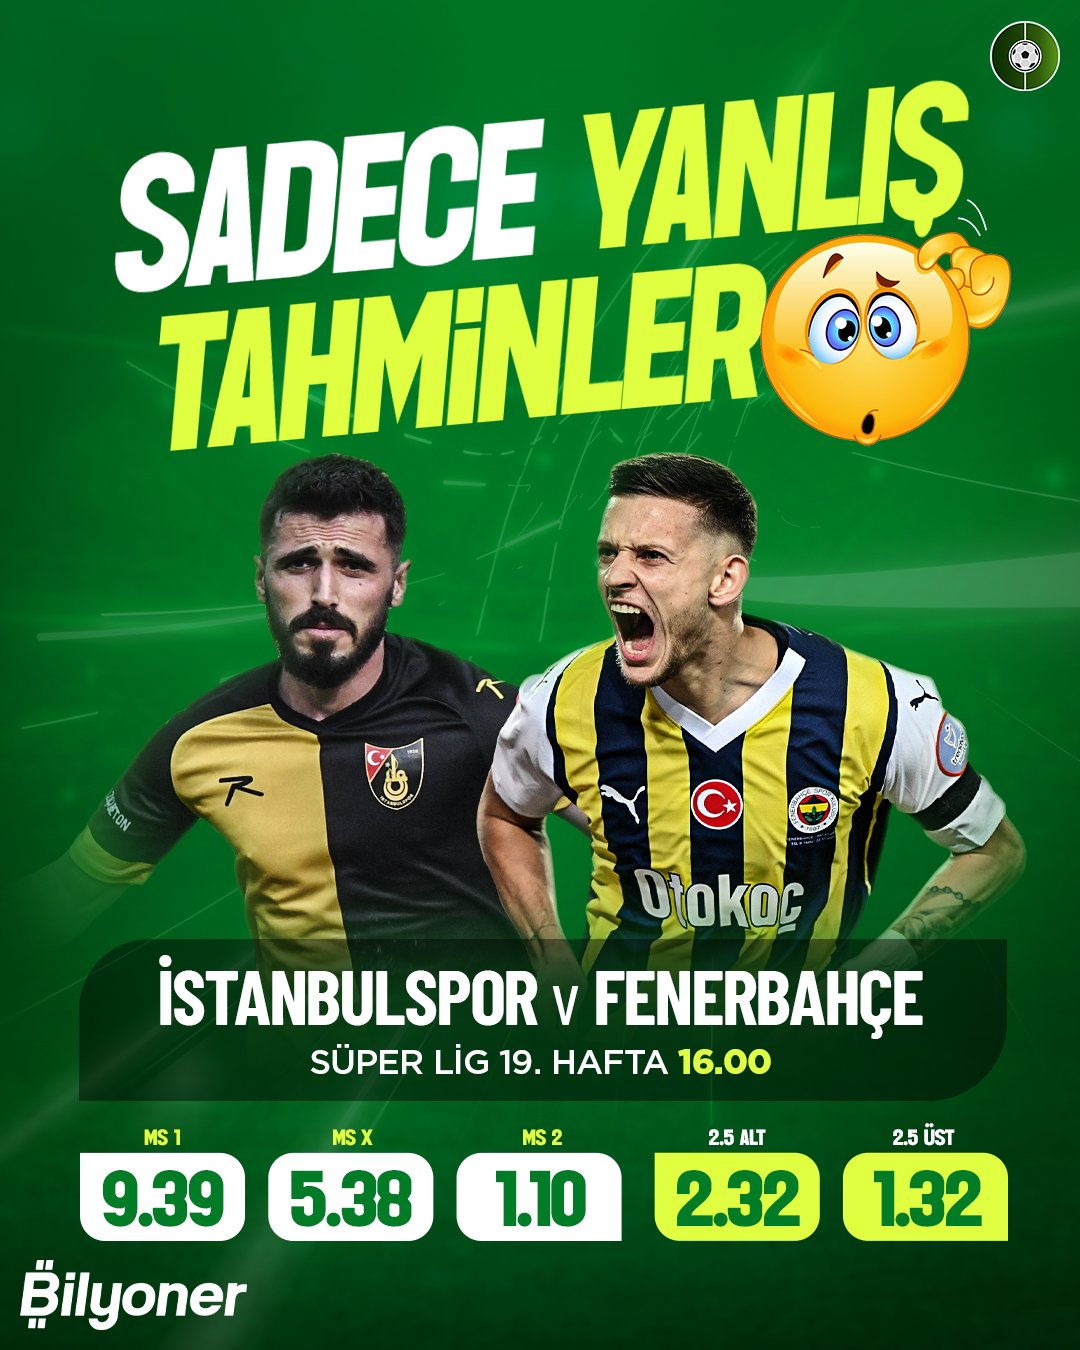 The Fenerbahçe vs Galatasaray Rivalry: A Battle for Supremacy